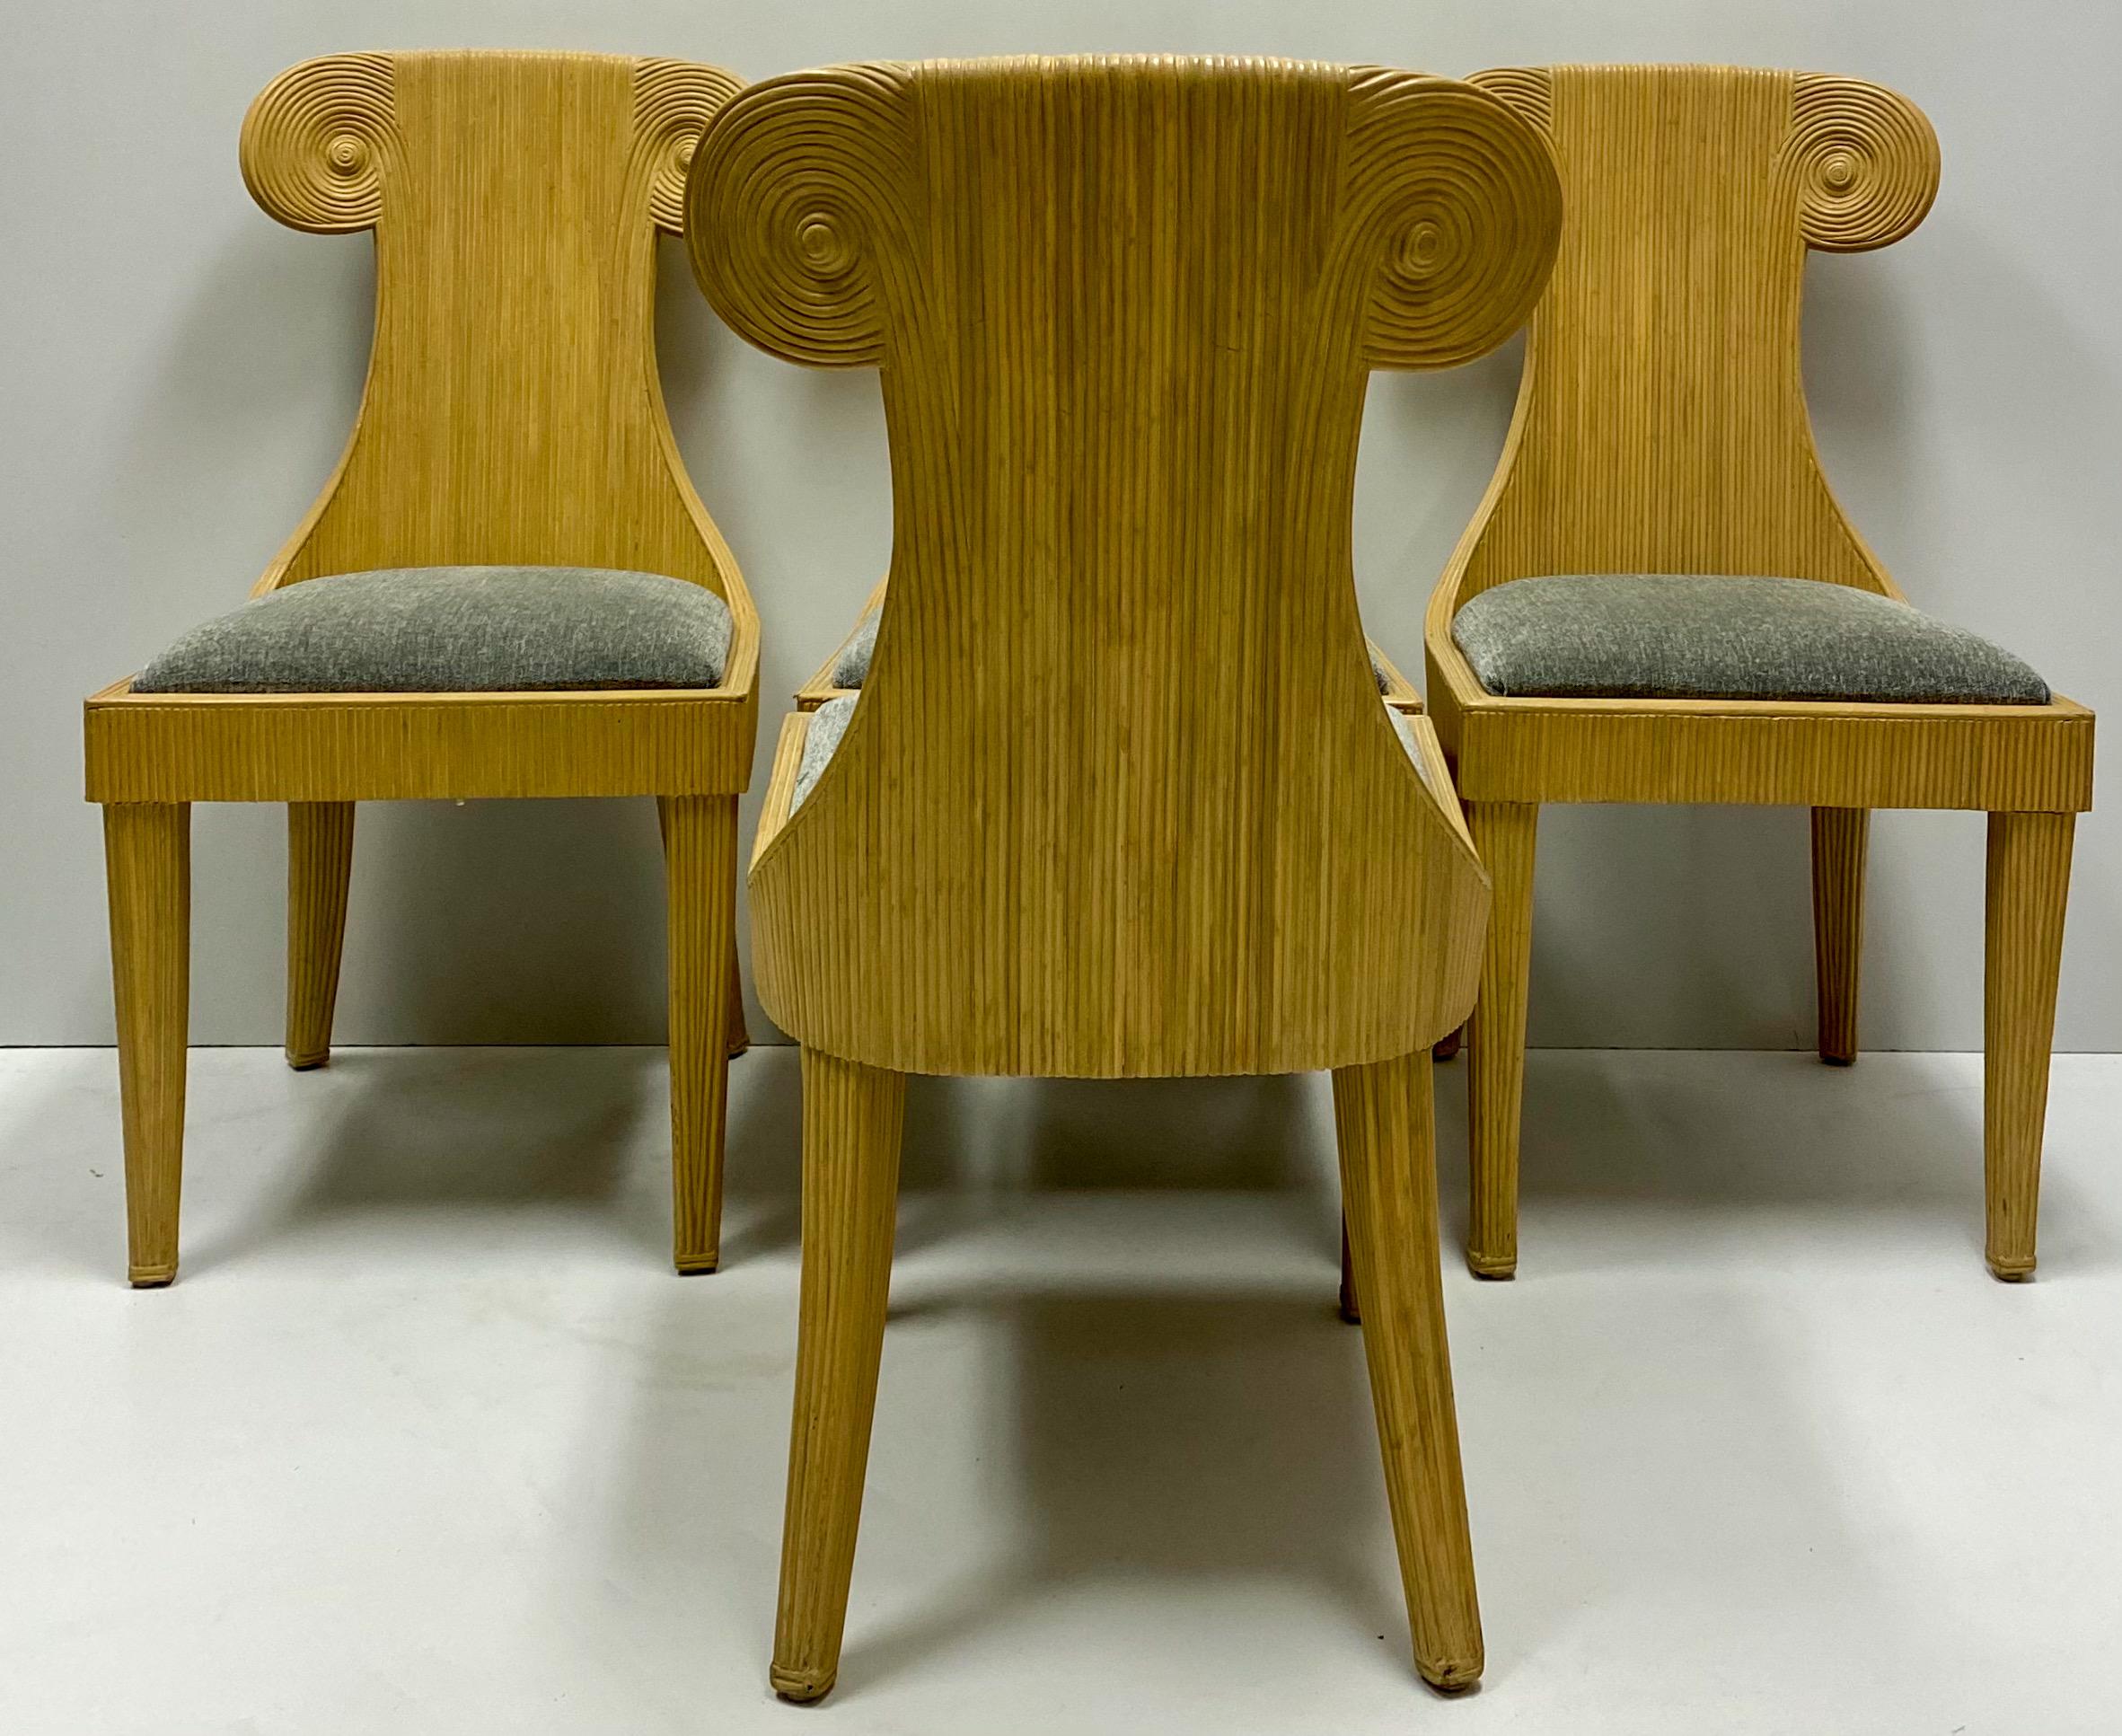 Organic Modern 1970s Italian Pencil Bamboo Chairs with Klismos Form, Set of Four